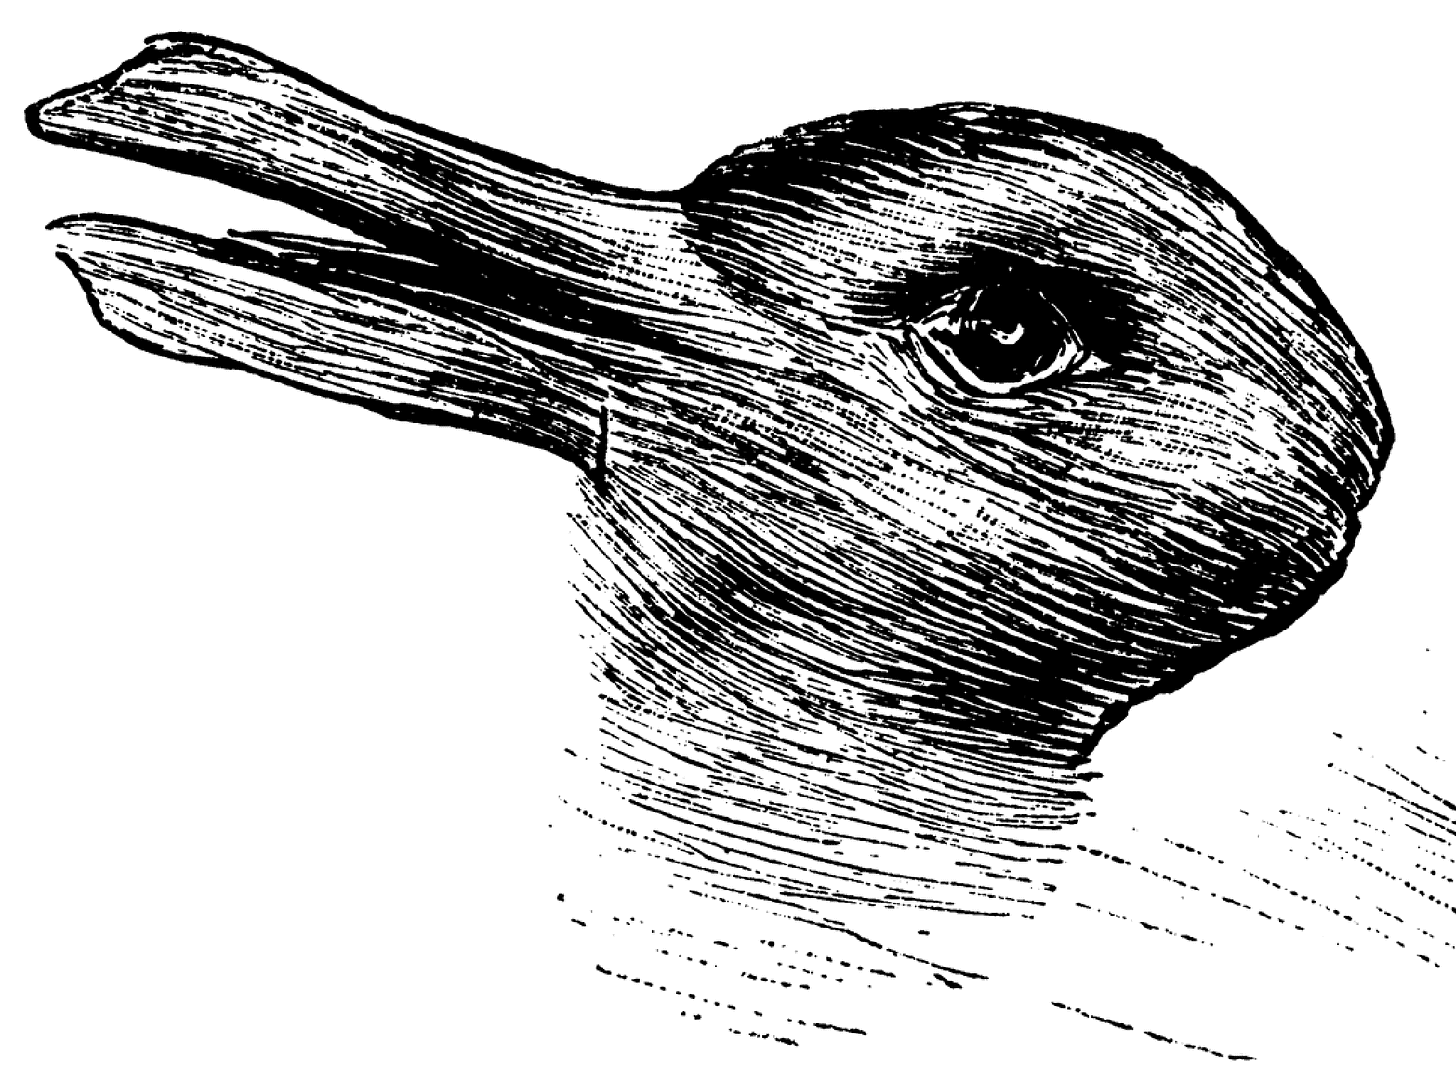 Duck or rabbit? The 100-year-old optical illusion that ...